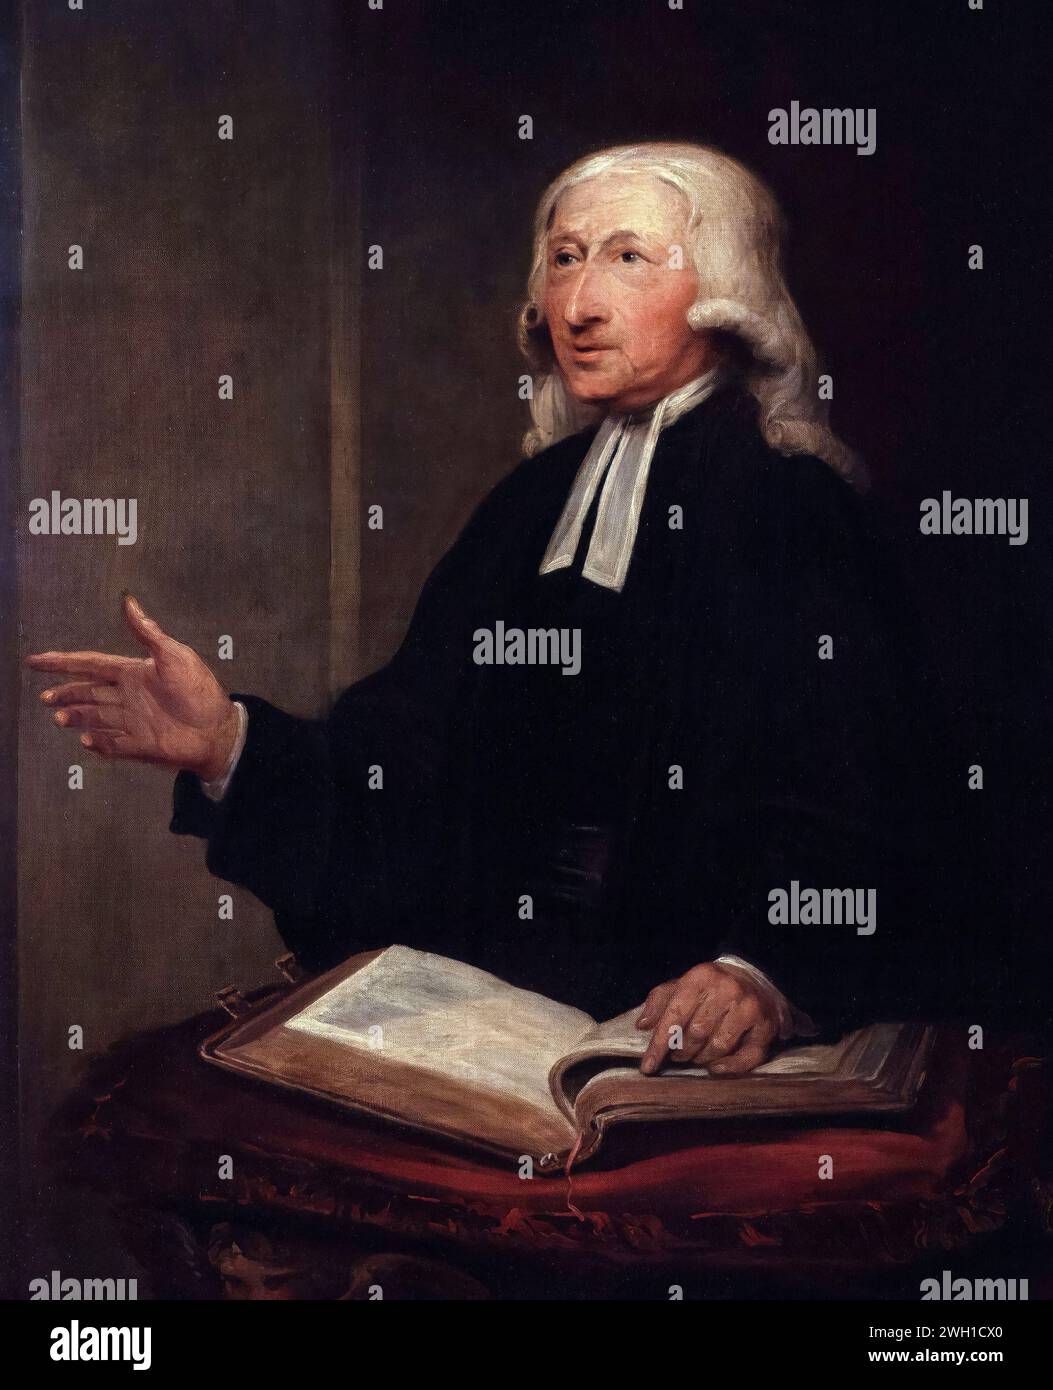 John Wesley (1703-1791), English cleric, theologian, and evangelist, leader of the Methodist movement within the Church of England, portrait painting in oil on canvas by William Hamilton, 1788 Stock Photo